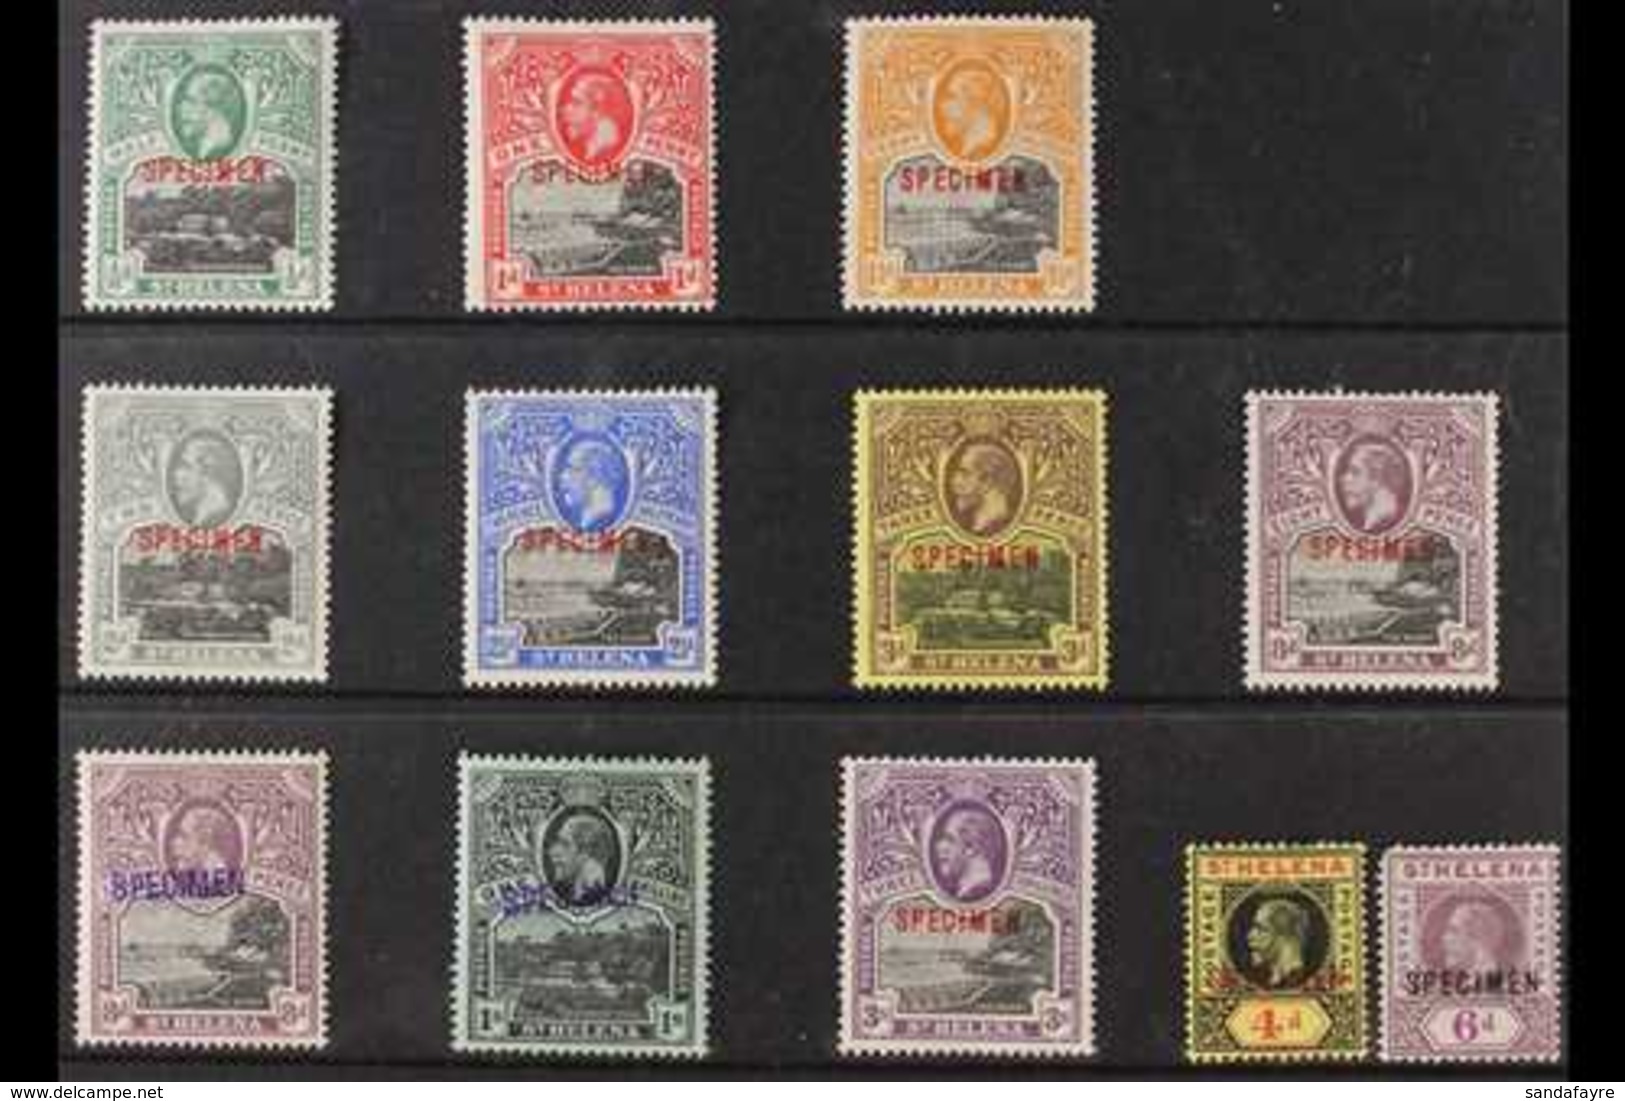 1912-13 KGV SPECIMENS COLLECTION.  An ALL DIFFERENT Mint Collection Of Overprinted & Handstamped "SPECIMEN" Issues Prese - St. Helena